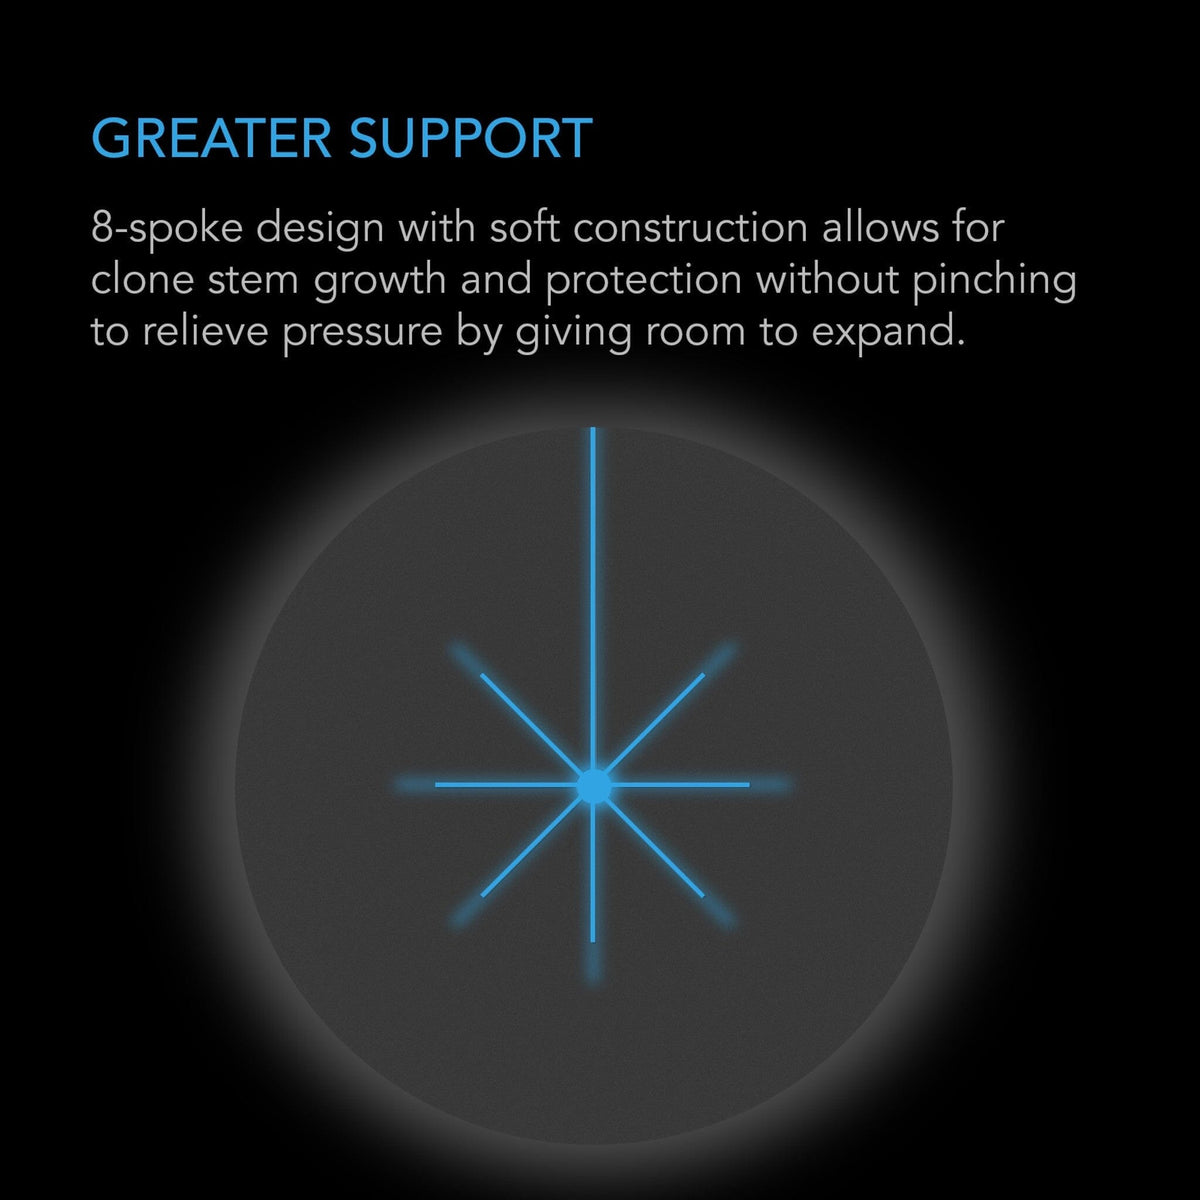 Greater support with 8 spoke design